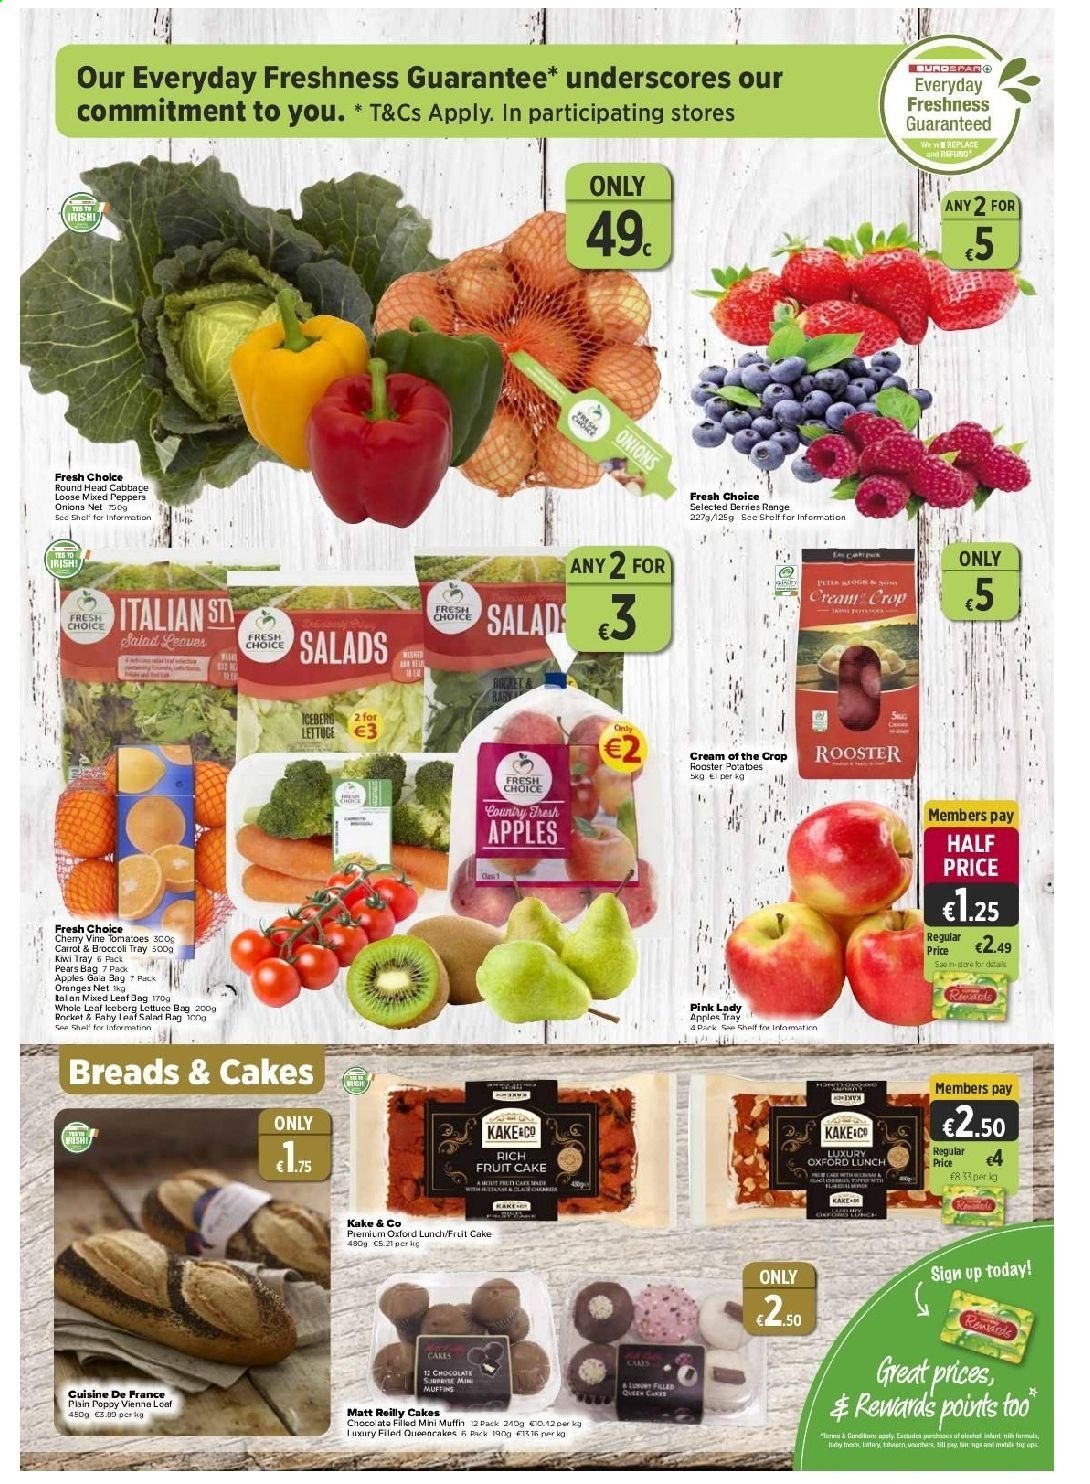 thumbnail - EUROSPAR offer  - 15.04.2021 - 05.05.2021 - Sales products - cake, muffin, broccoli, rocket, onion, salad, peppers, Gala, kiwi, cherries, pears, oranges, apples, Pink Lady, chocolate, tray. Page 3.